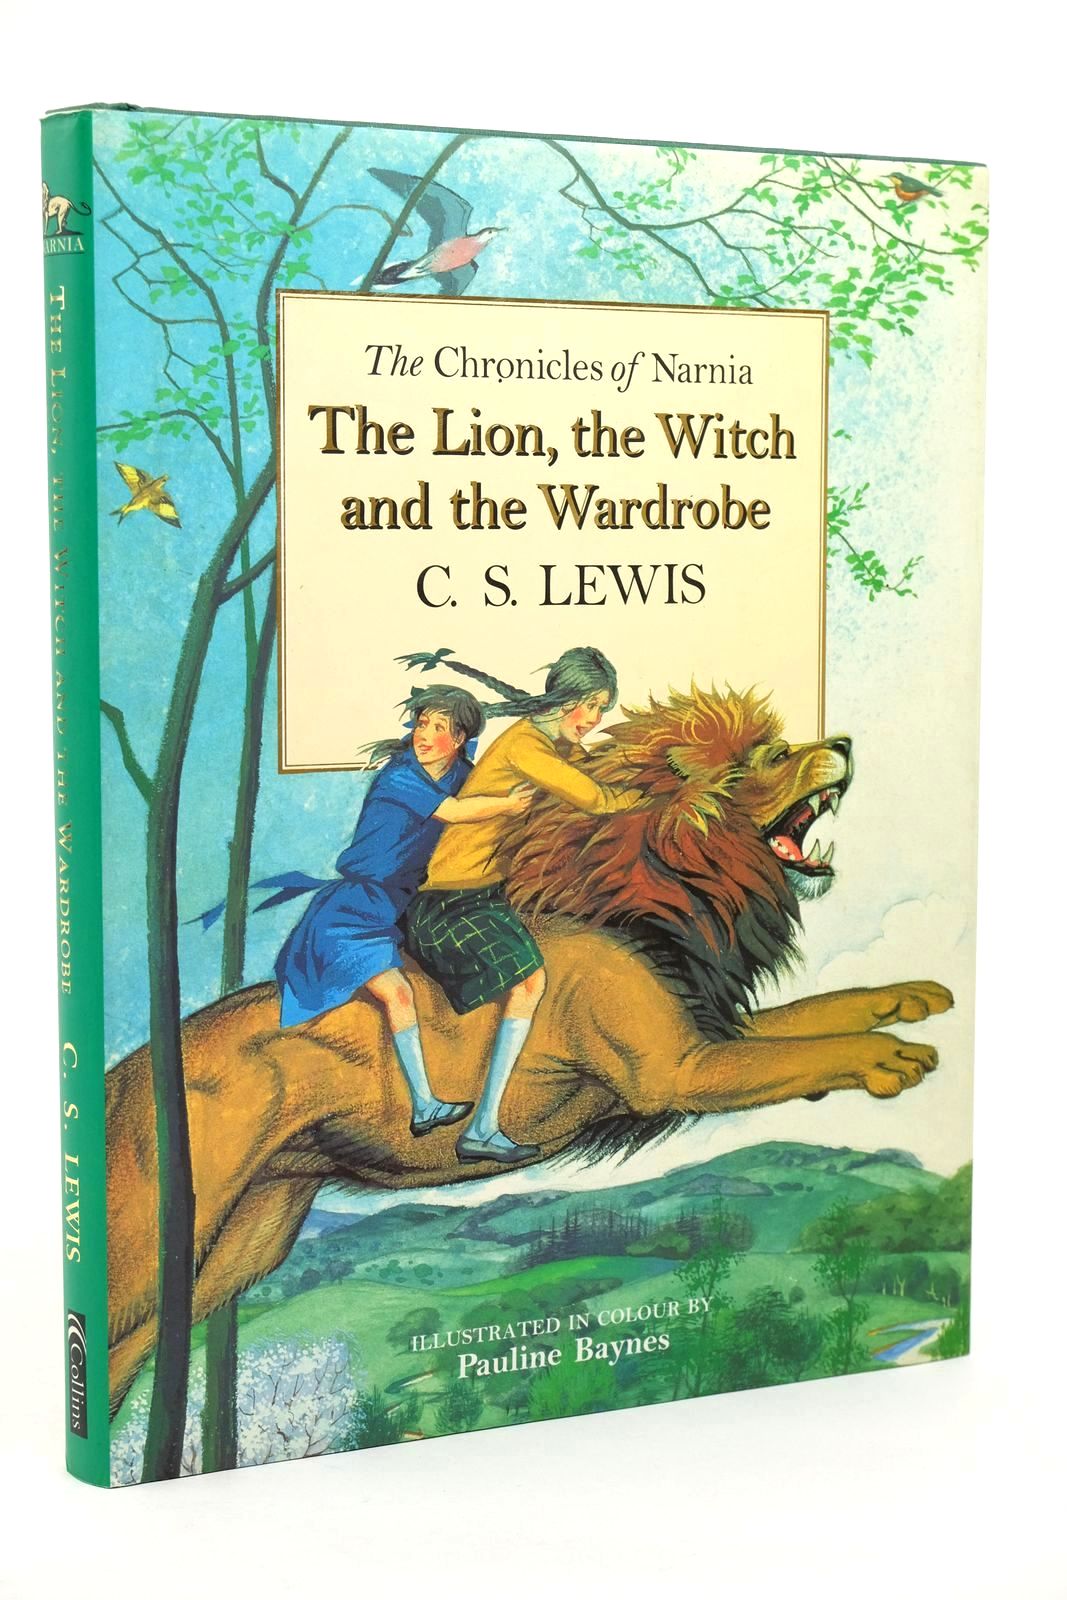 Photo of THE LION, THE WITCH AND THE WARDROBE written by Lewis, C.S. illustrated by Baynes, Pauline published by Collins (STOCK CODE: 1323013)  for sale by Stella & Rose's Books